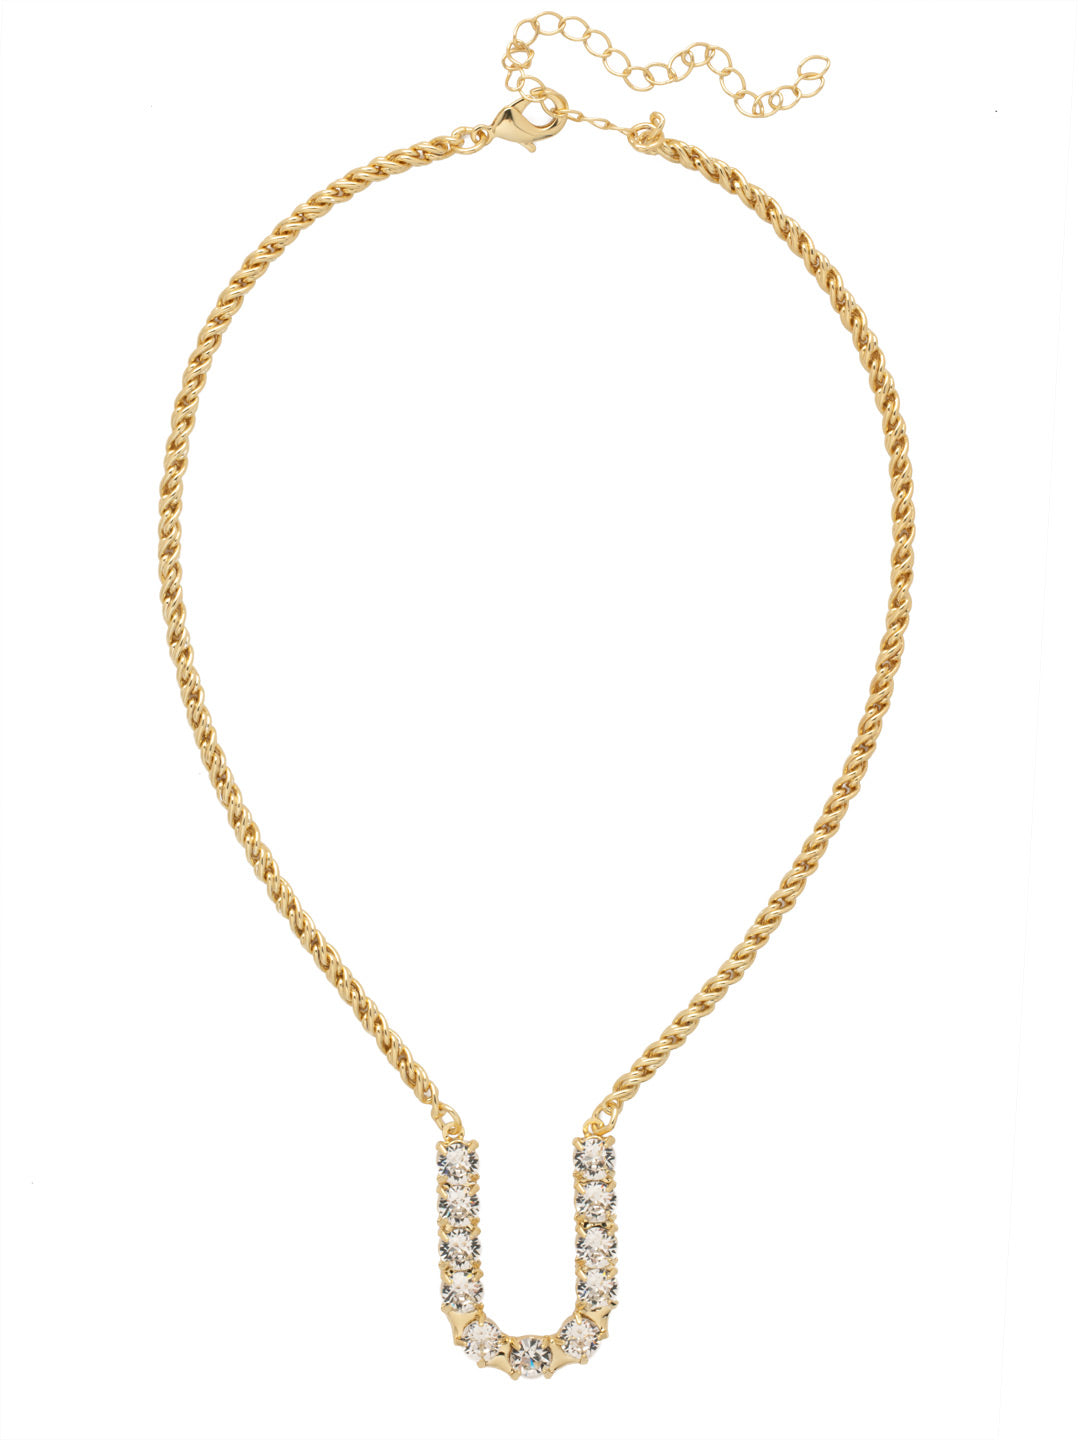 U Initial Rope Pendant Necklace - NFK40BGCRY - <p>The Initial Rope Pendant Necklace features a crystal encrusted metal monogram pendant on an adjustable rope chain, secured with a lobster claw clasp. From Sorrelli's Crystal collection in our Bright Gold-tone finish.</p>